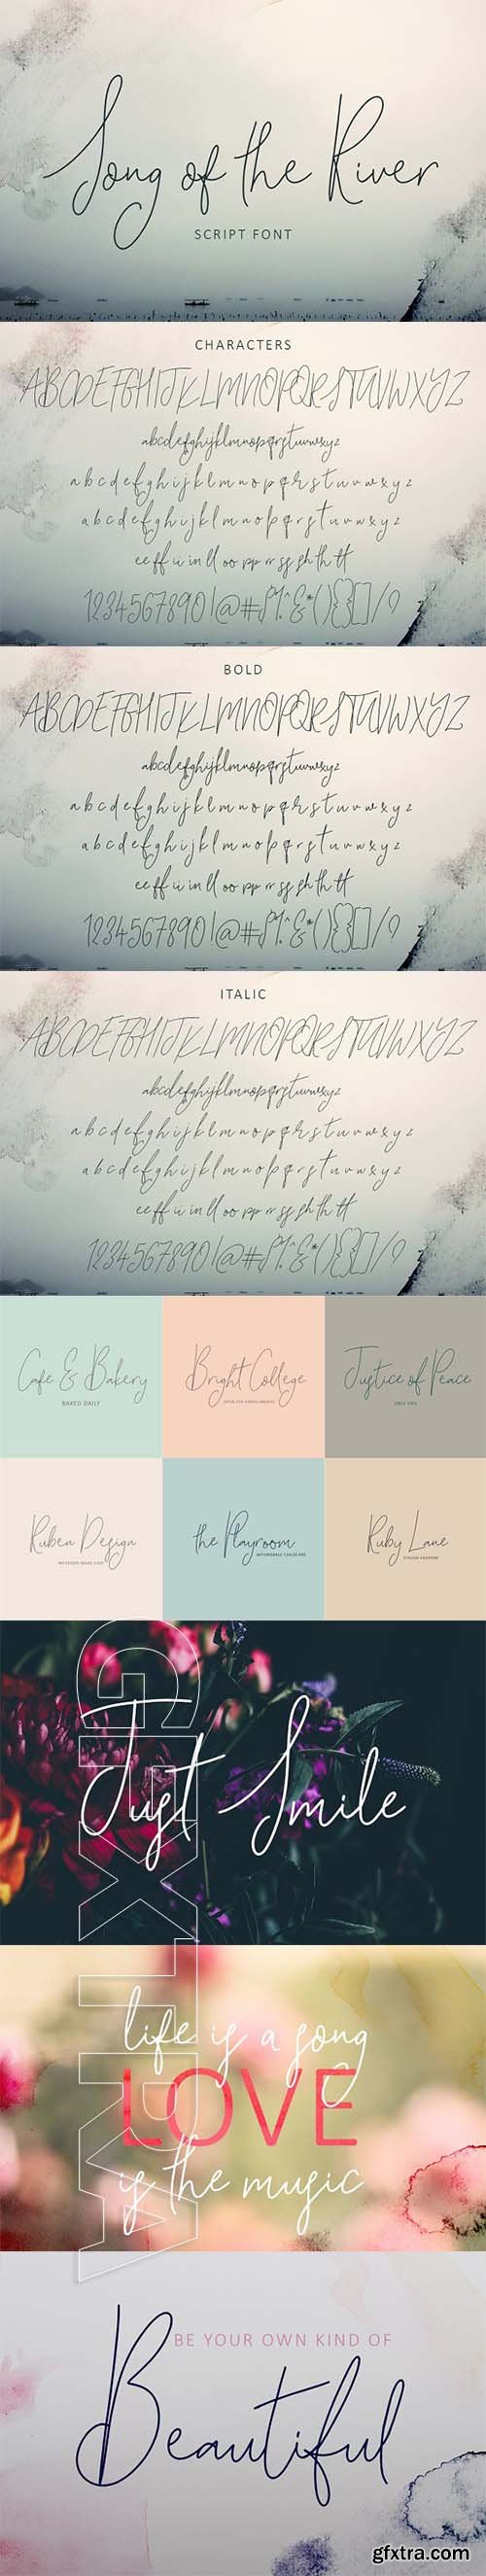 CreativeMarket - Song of the River Script Font 2163139